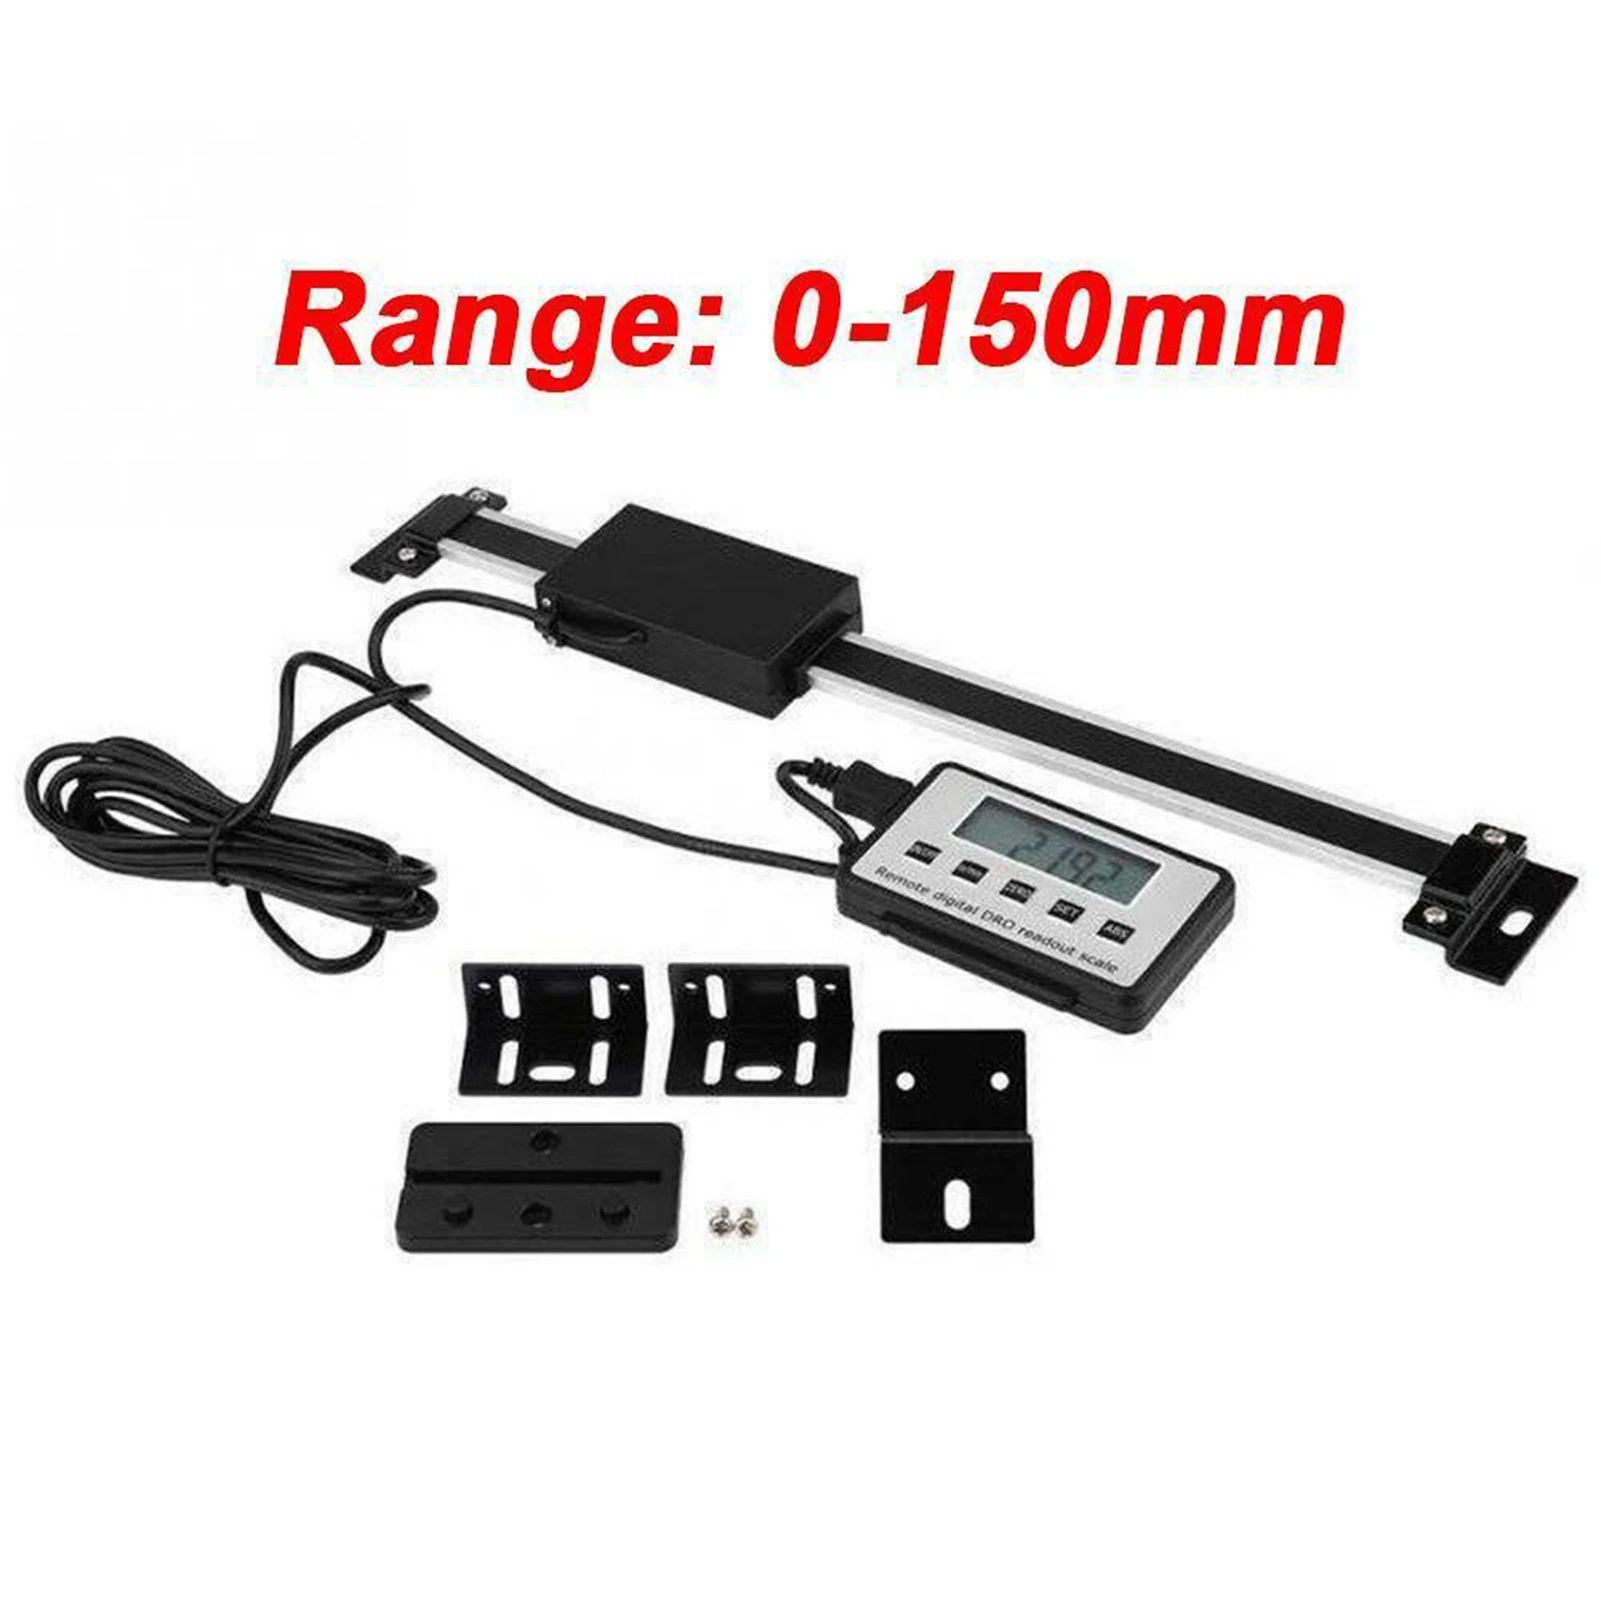 

External Display External Ruler Tools Linear Magnetic Remote Scale External Display 0-150mm/0-6in 0-300mm /0-12inch